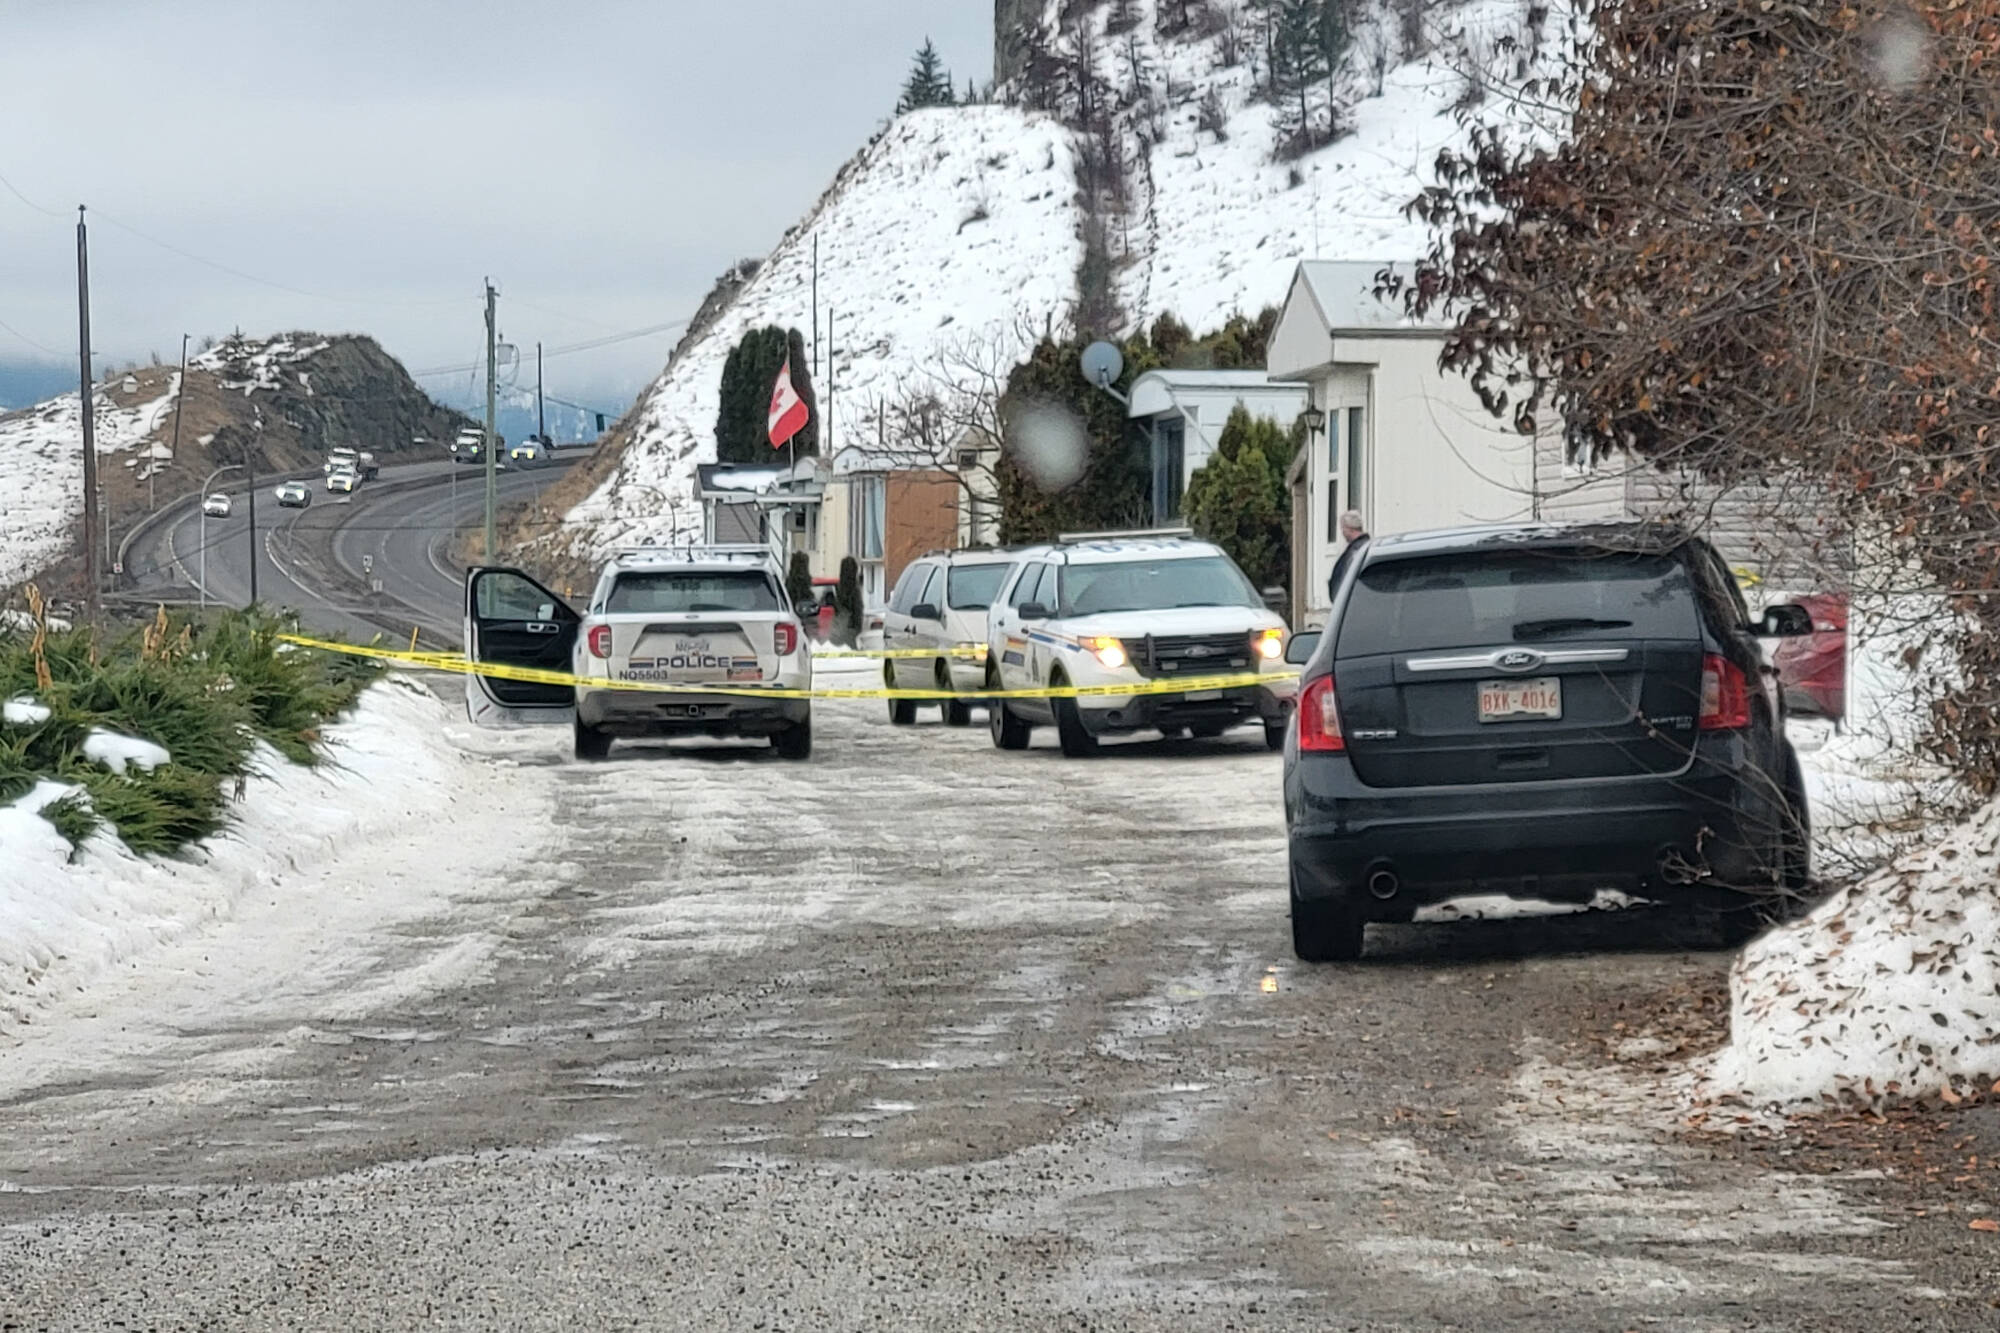 A large police presence on Clerke Road in Coldstream early Tuesday, Jan. 17. (Roger Knox - Morning Star)